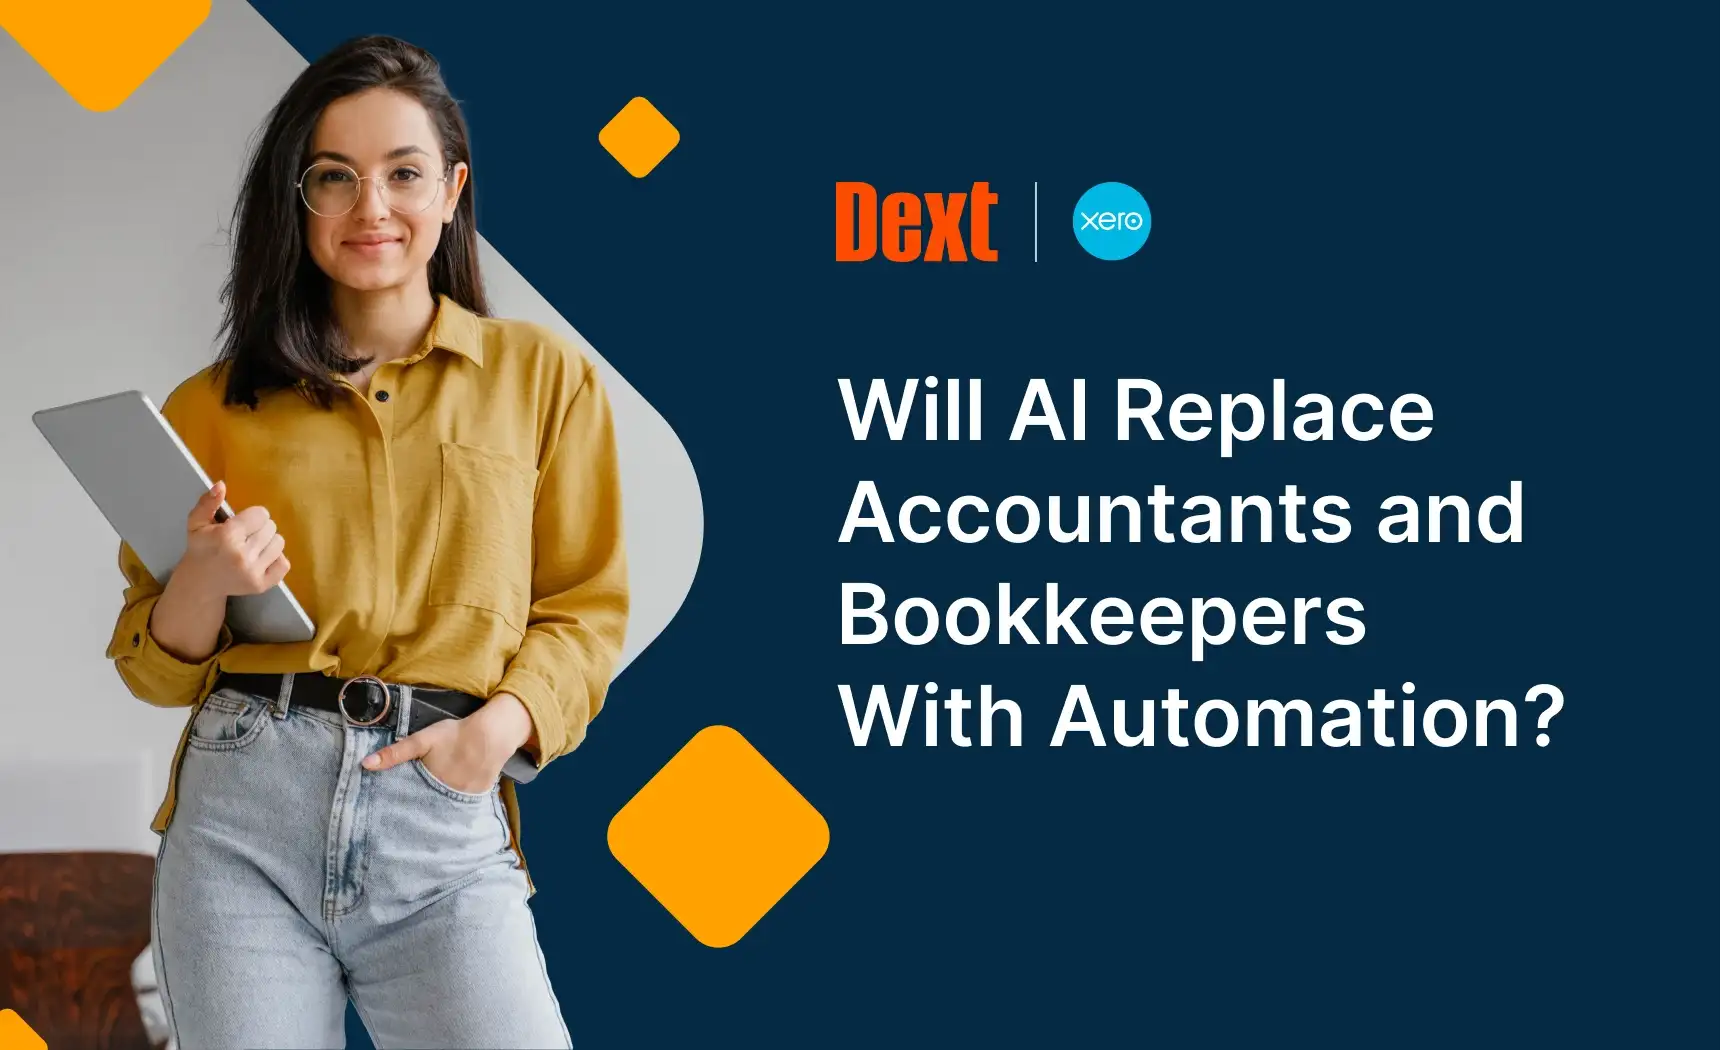 Dext: Will AI Replace Accountants and Bookkeepers With Automation? logo